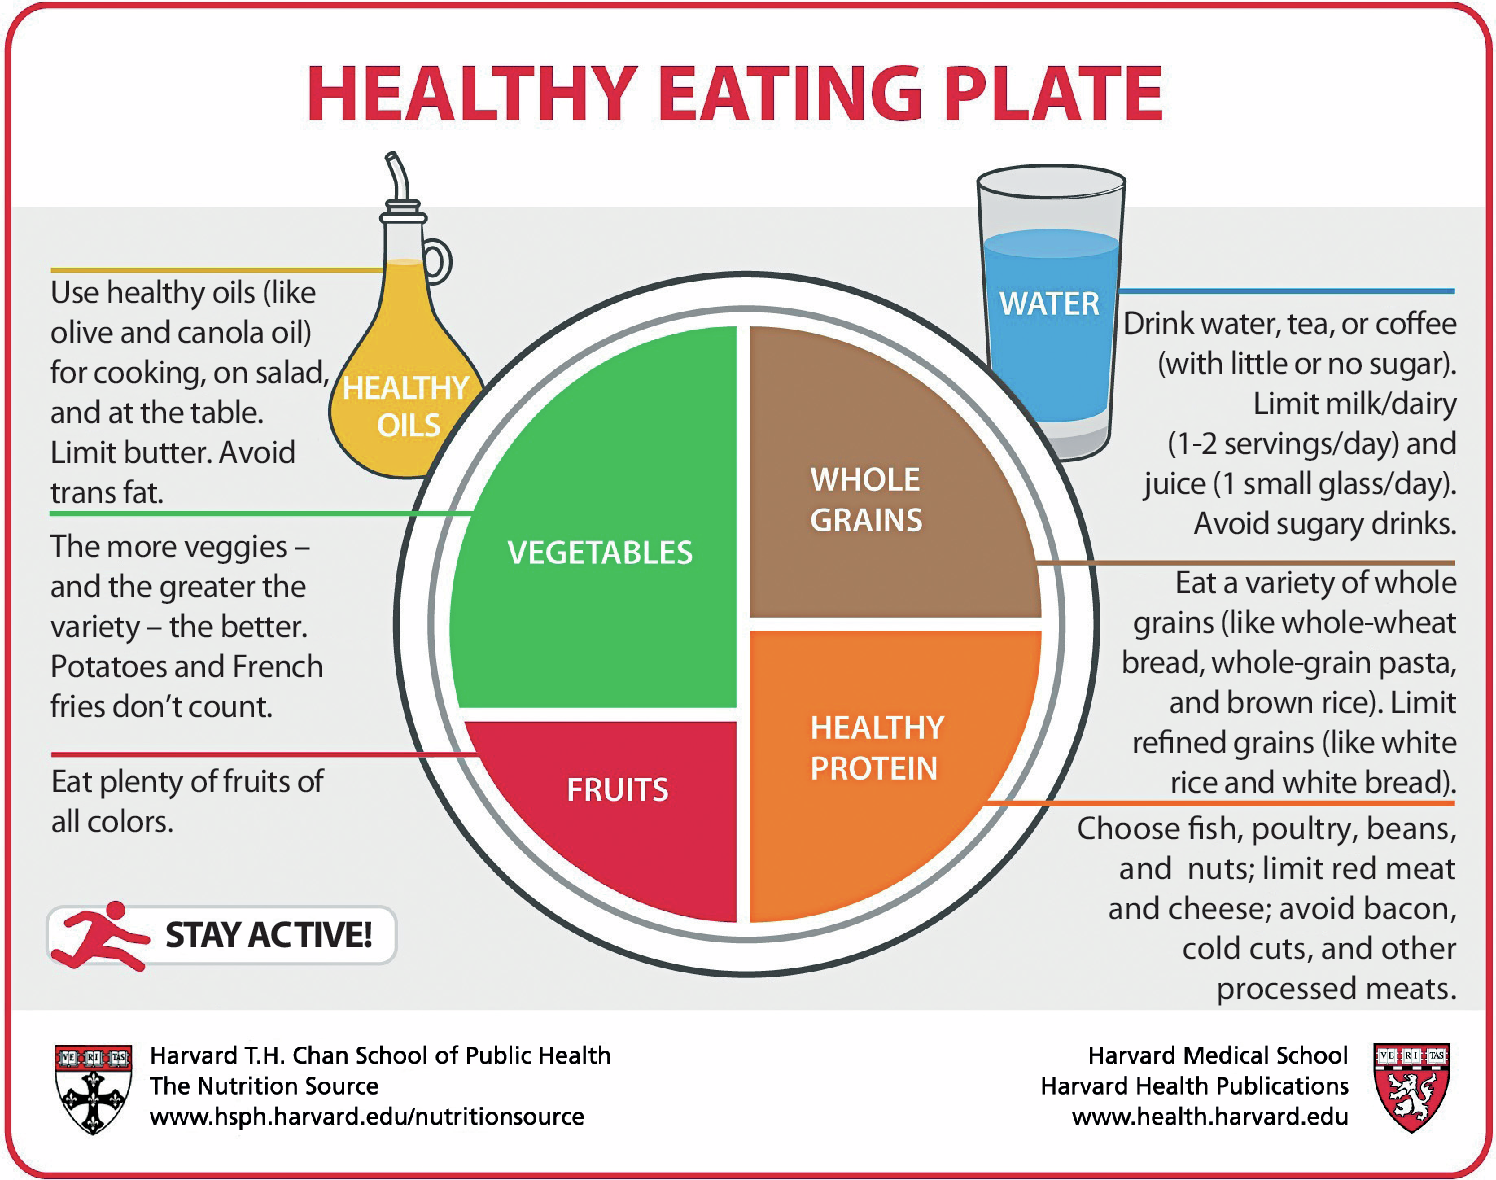 Infográfico. HEALTHY EATING PLATE. Um prato branco e redondo dividido em quatro partes; ao lado dele há uma jarra e um copo. No prato, na divisão maior, que é maior que um quarto do prato, identificada com a cor verde, lê-se VEGETABLES: The more veggies – and the greater the variety – the better. Potatoes and French fries don’t count. Numa divisão que equivale a um quarto do prato, identificada pela cor marrom, lê-se WHOLE GRAINS: Eat a variety of whole grains (like whole-wheat bread, whole-grain pasta, and brown rice). Limit refined grains (like white rice and white bread). Numa divisão que equivale a um quarto do prato, identificada pela cor laranja, lê-se HEALTHY PROTEIN: Choose fish, poultry, beans, and nuts; limit red meat and cheese; avoid bacon, cold cuts, and other processed meats. Numa divisão menor, que equivale a menos de um quarto do prato, identificada pela cor vermelha, lê-se FRUITS: Eat plenty of fruits of all colors. No copo à direita lê-se WATER: Drink water, tea, or coff­ee (with little or no sugar). Limit milk/dairy (one to two servings per day) and juice (one small glass per day). Avoid sugary drinks. Na jarra à esquerda está escrito HEALTHY OILS: Use healthy oils (like olive and canola oil) for cooking, on salad, and at the table. Limit butter. Avoid trans fat. Abaixo do prato à esquerda lê-se STAY ACTIVE! Na parte inferior esquerda há um brasão e, ao lado dele, lê-se HARVARD T. H. CHAN SCHOOL OF PUBLIC HEALTH, THE NUTRITION SOURCE, WWW.HSPH.HARVARD.EDU/NUTRITIONSOURCE. Na parte inferior direita há outro brasão e lê-se HARVARD MEDICAL SCHOOL, HARVARD HEALTH  
PUBLCATIONS, WWW.HEALTH.HARVARD.EDU.